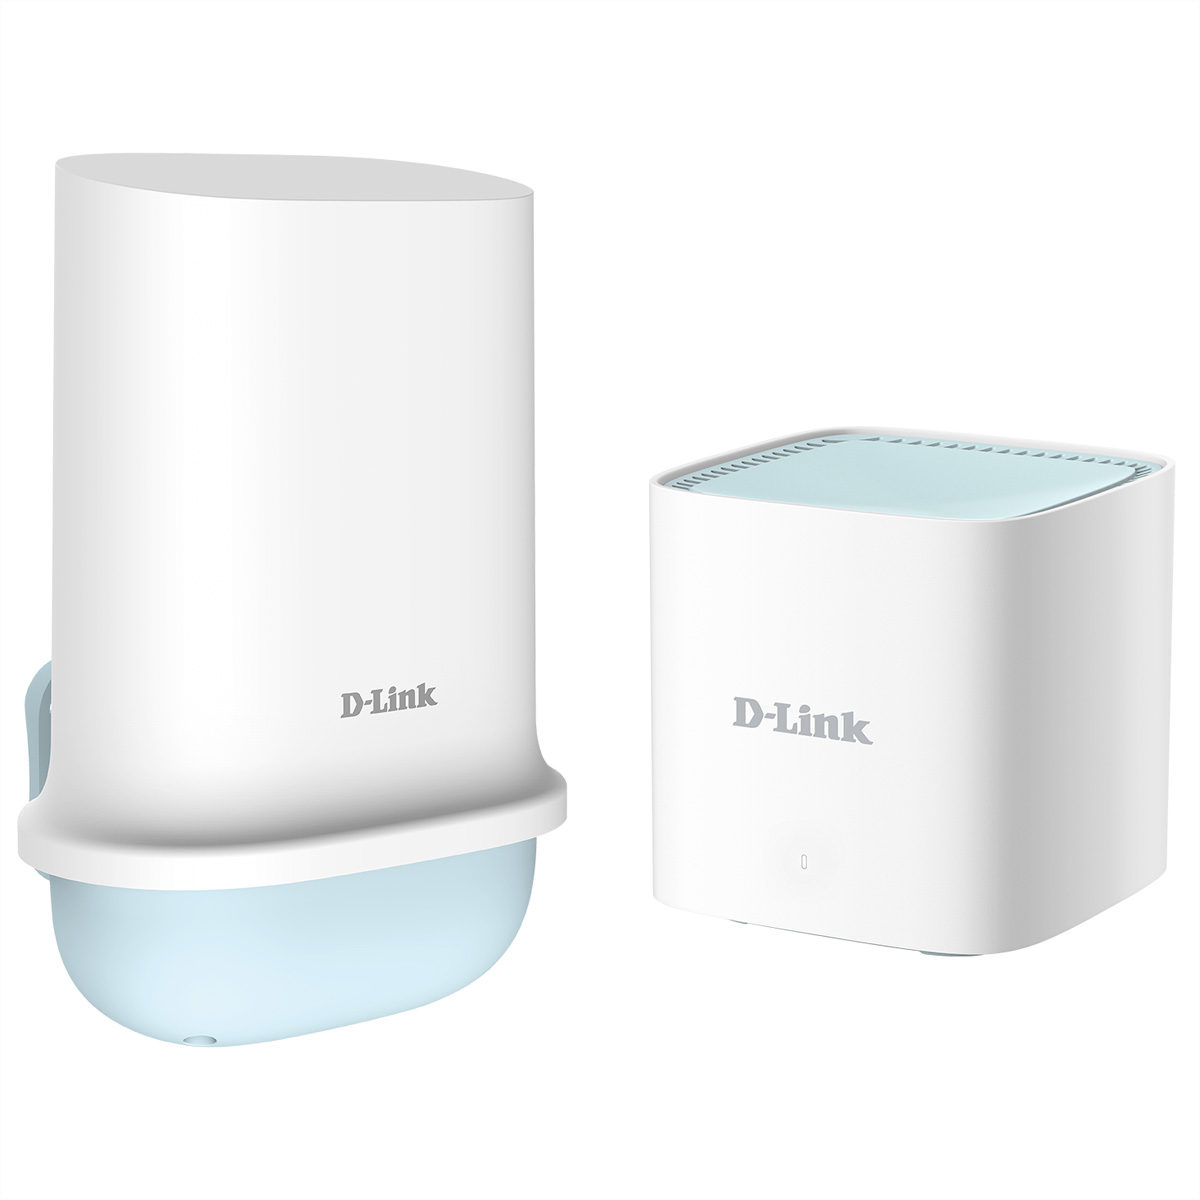 D-LINK DWP-1010/KT Outdoor 5G Unit & AX1500 Wi-Fi Router Kit